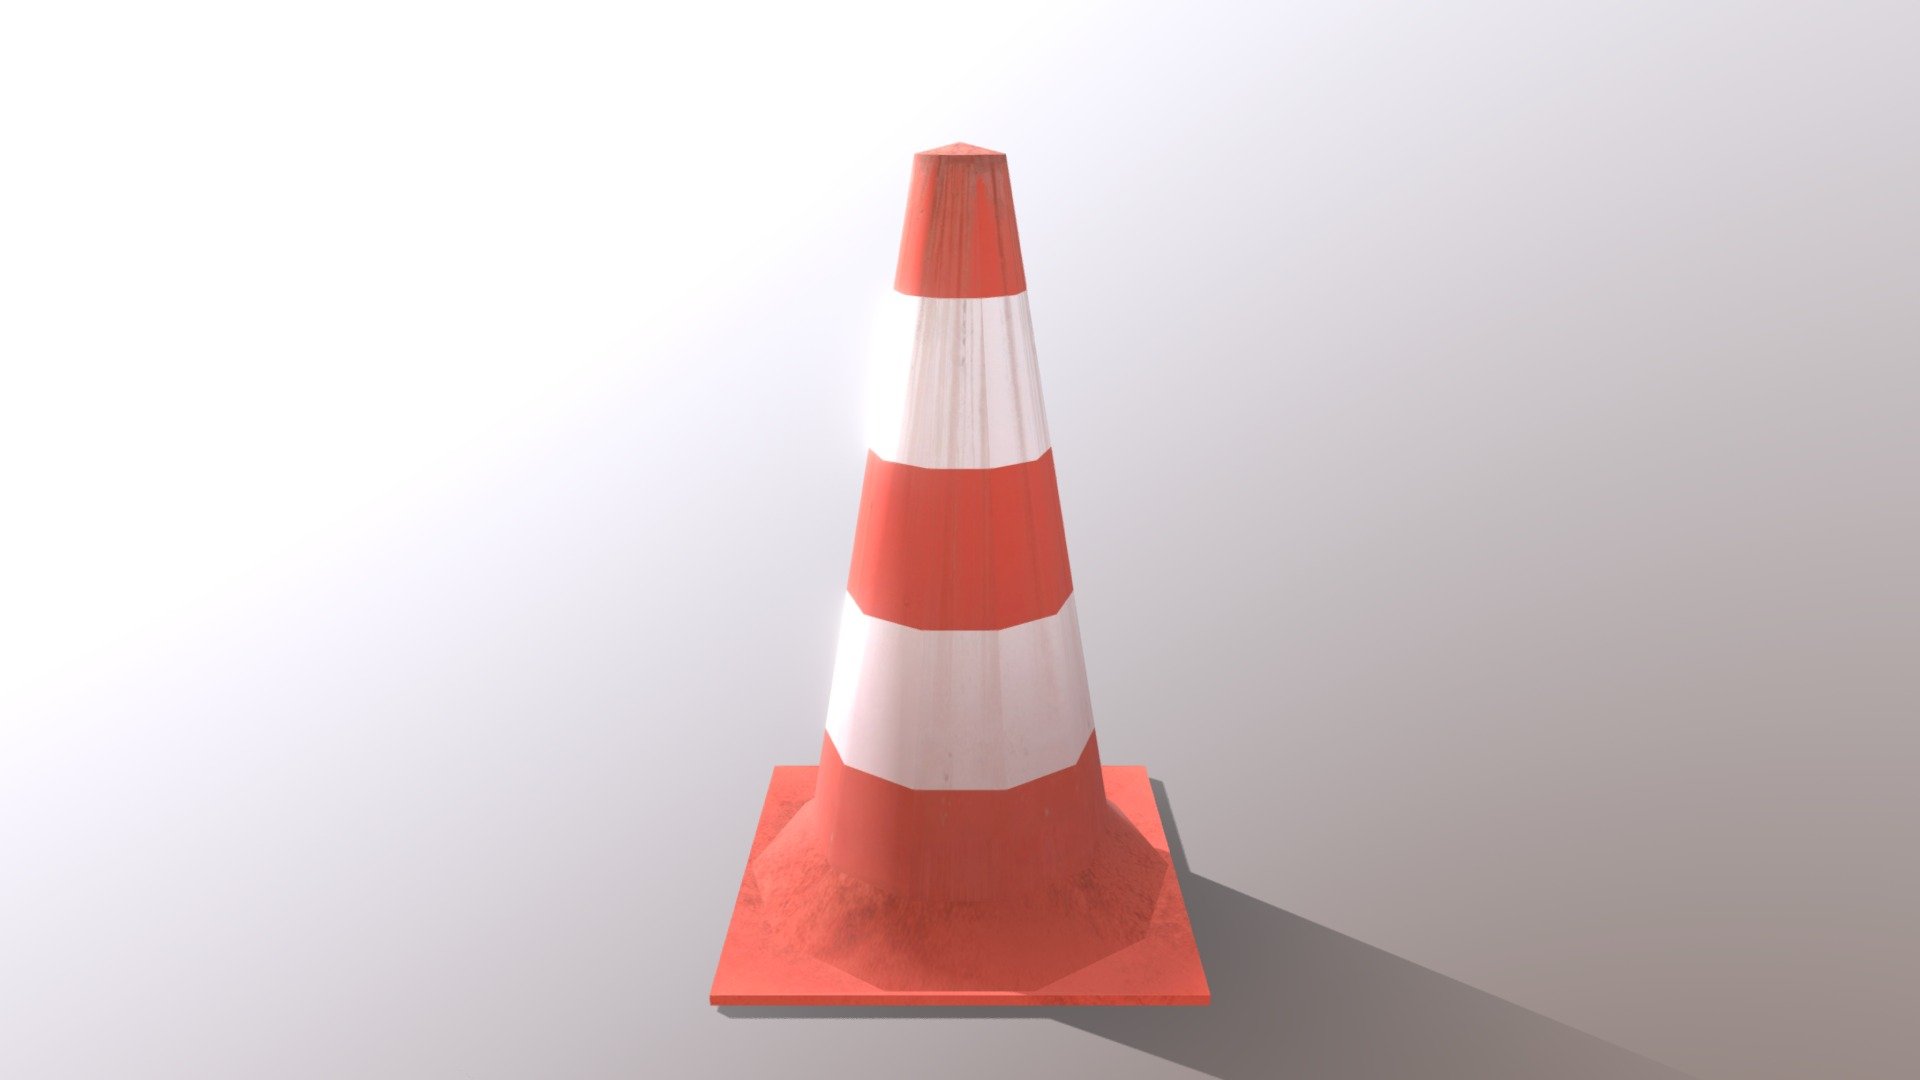 Traffic cone 3D model.

Poly: 52
Vertex: 44
in subdivision level 0

2480x2480 JPGTexture
Include Diffuse and Normal

Lowpoly:Yes
Textures :Yes
Materials : Yes
Animated : No
Rig : No
UV: Yes
Unwrapped UVs : Yes,Non-overlapping
Geometry : Polygon Mesh/Polygonal
Poly: 52
Vertex: 44

Description For Sketchfab - Traffic cone 01 - 3D model by MadAssets 3d model